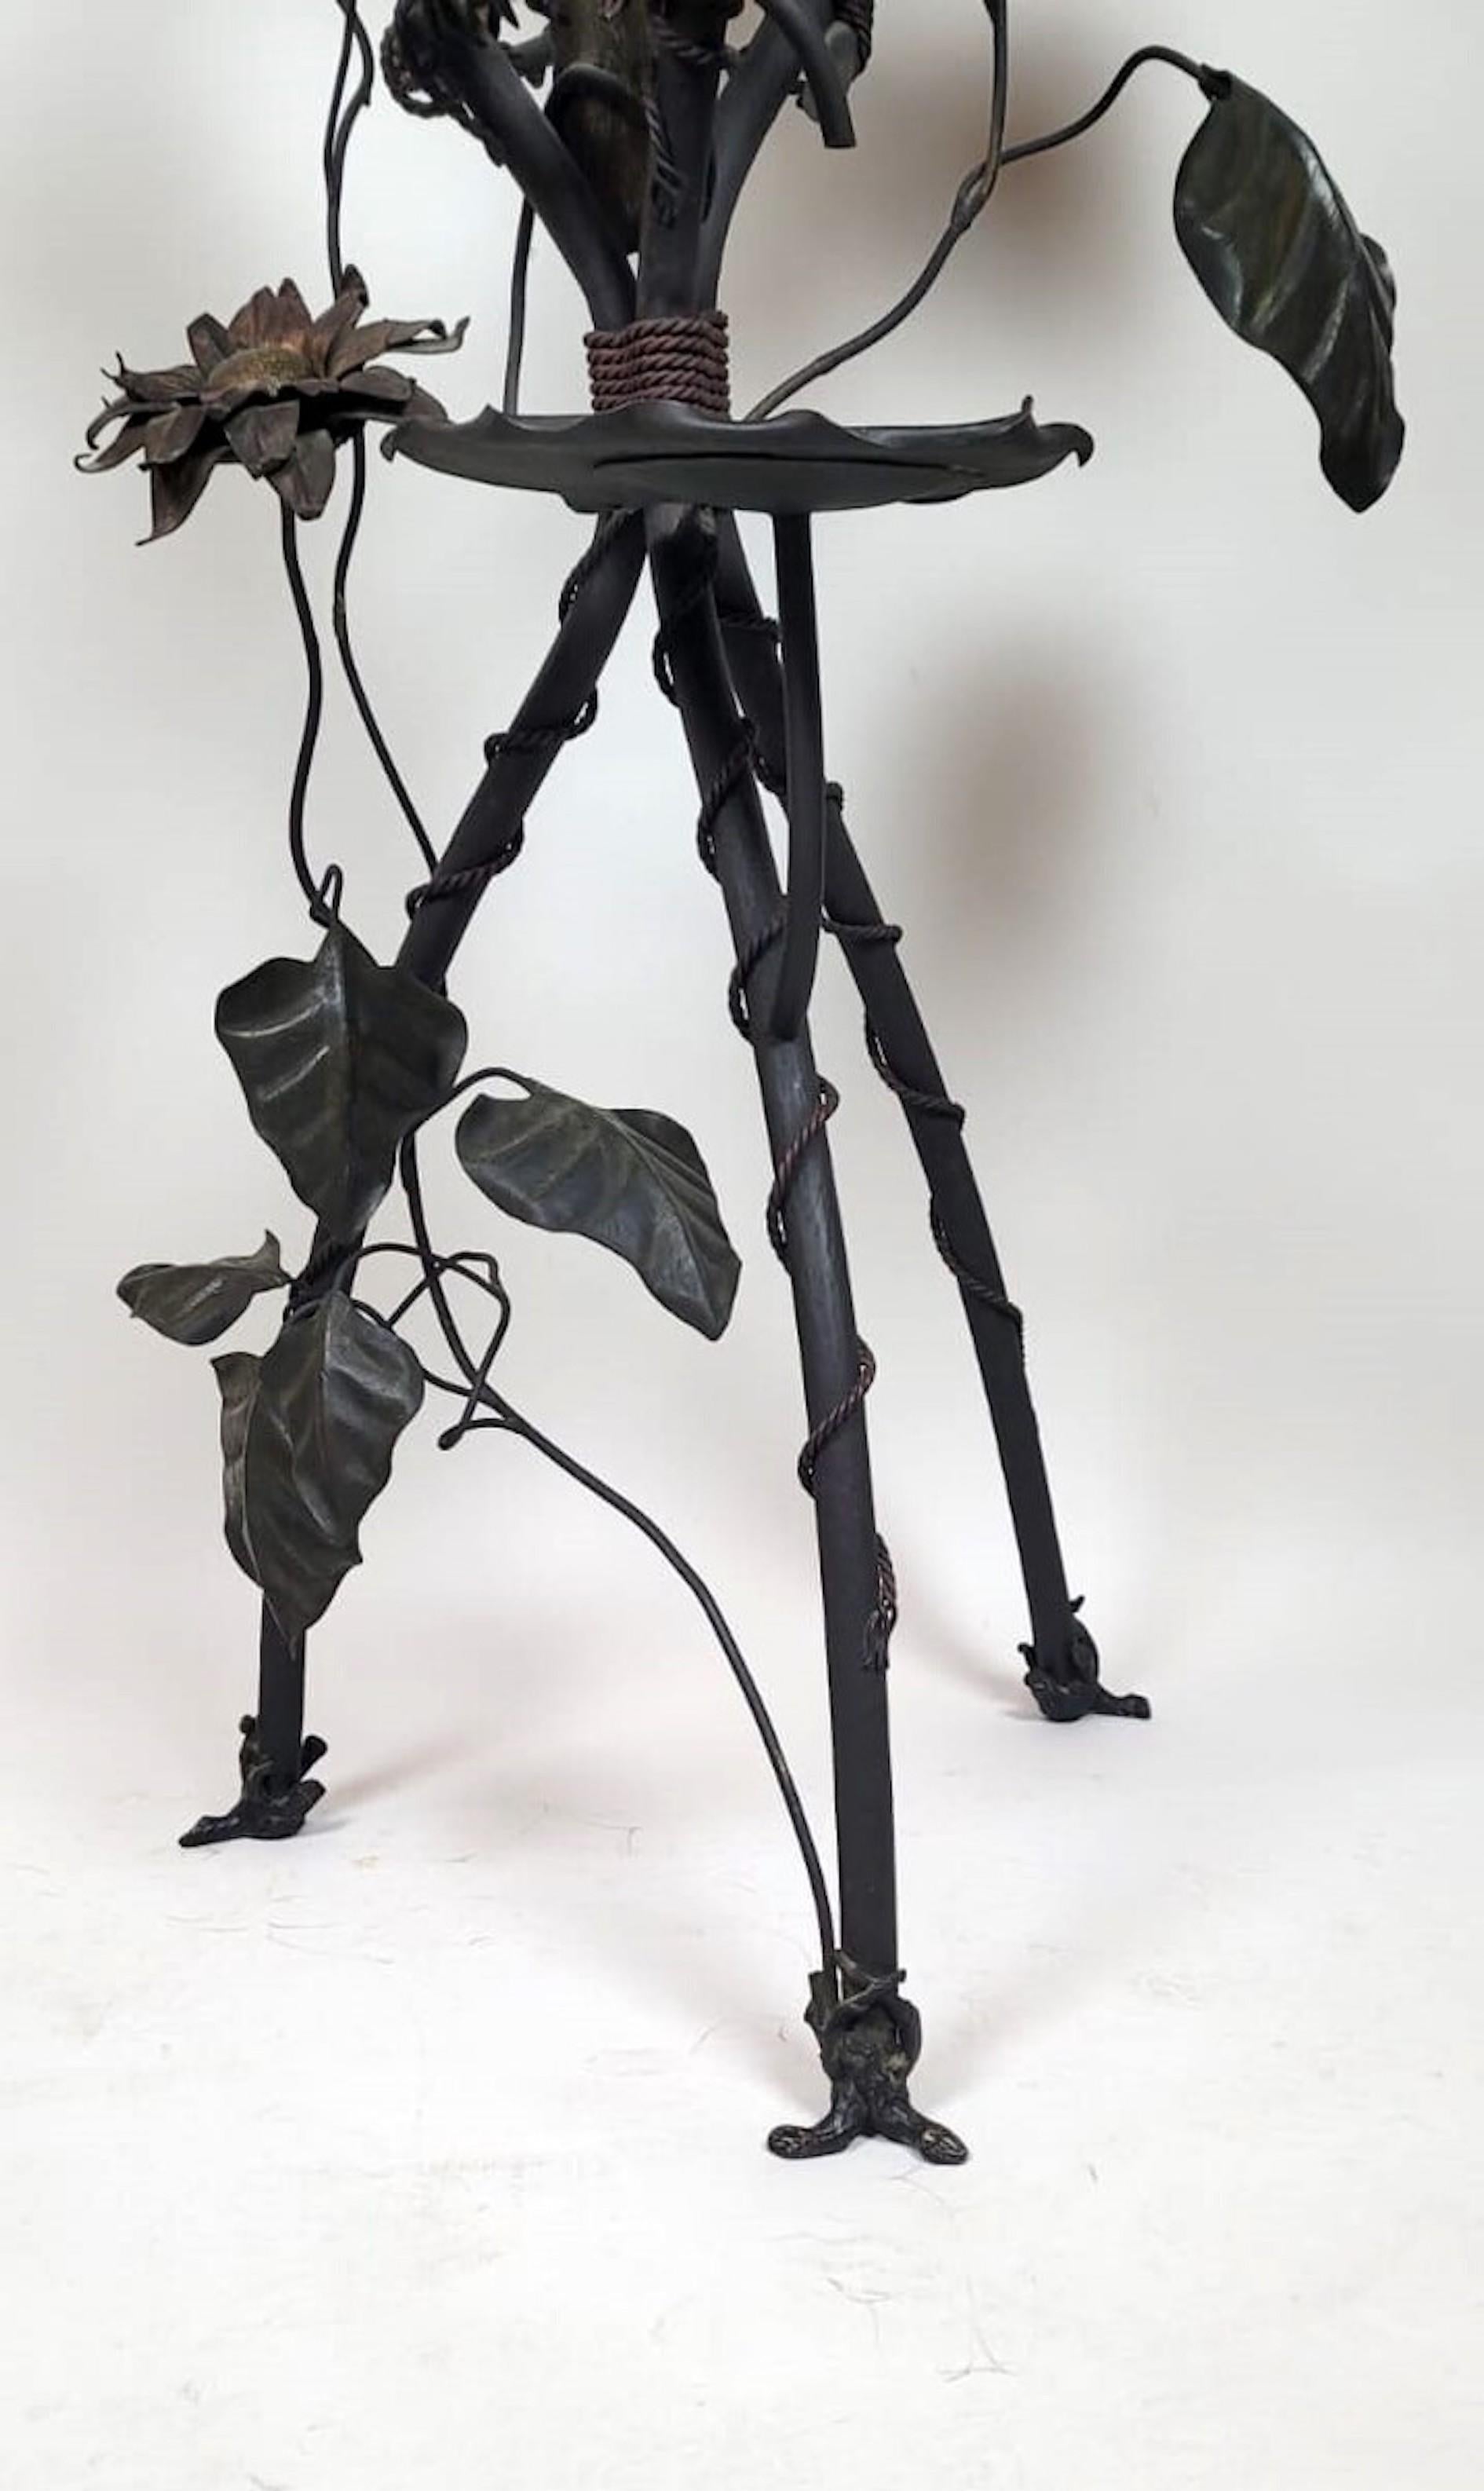 Wrought Iron Floor Lamp - Decorations With Leaves, Flowers, And Parrot For Sale 2